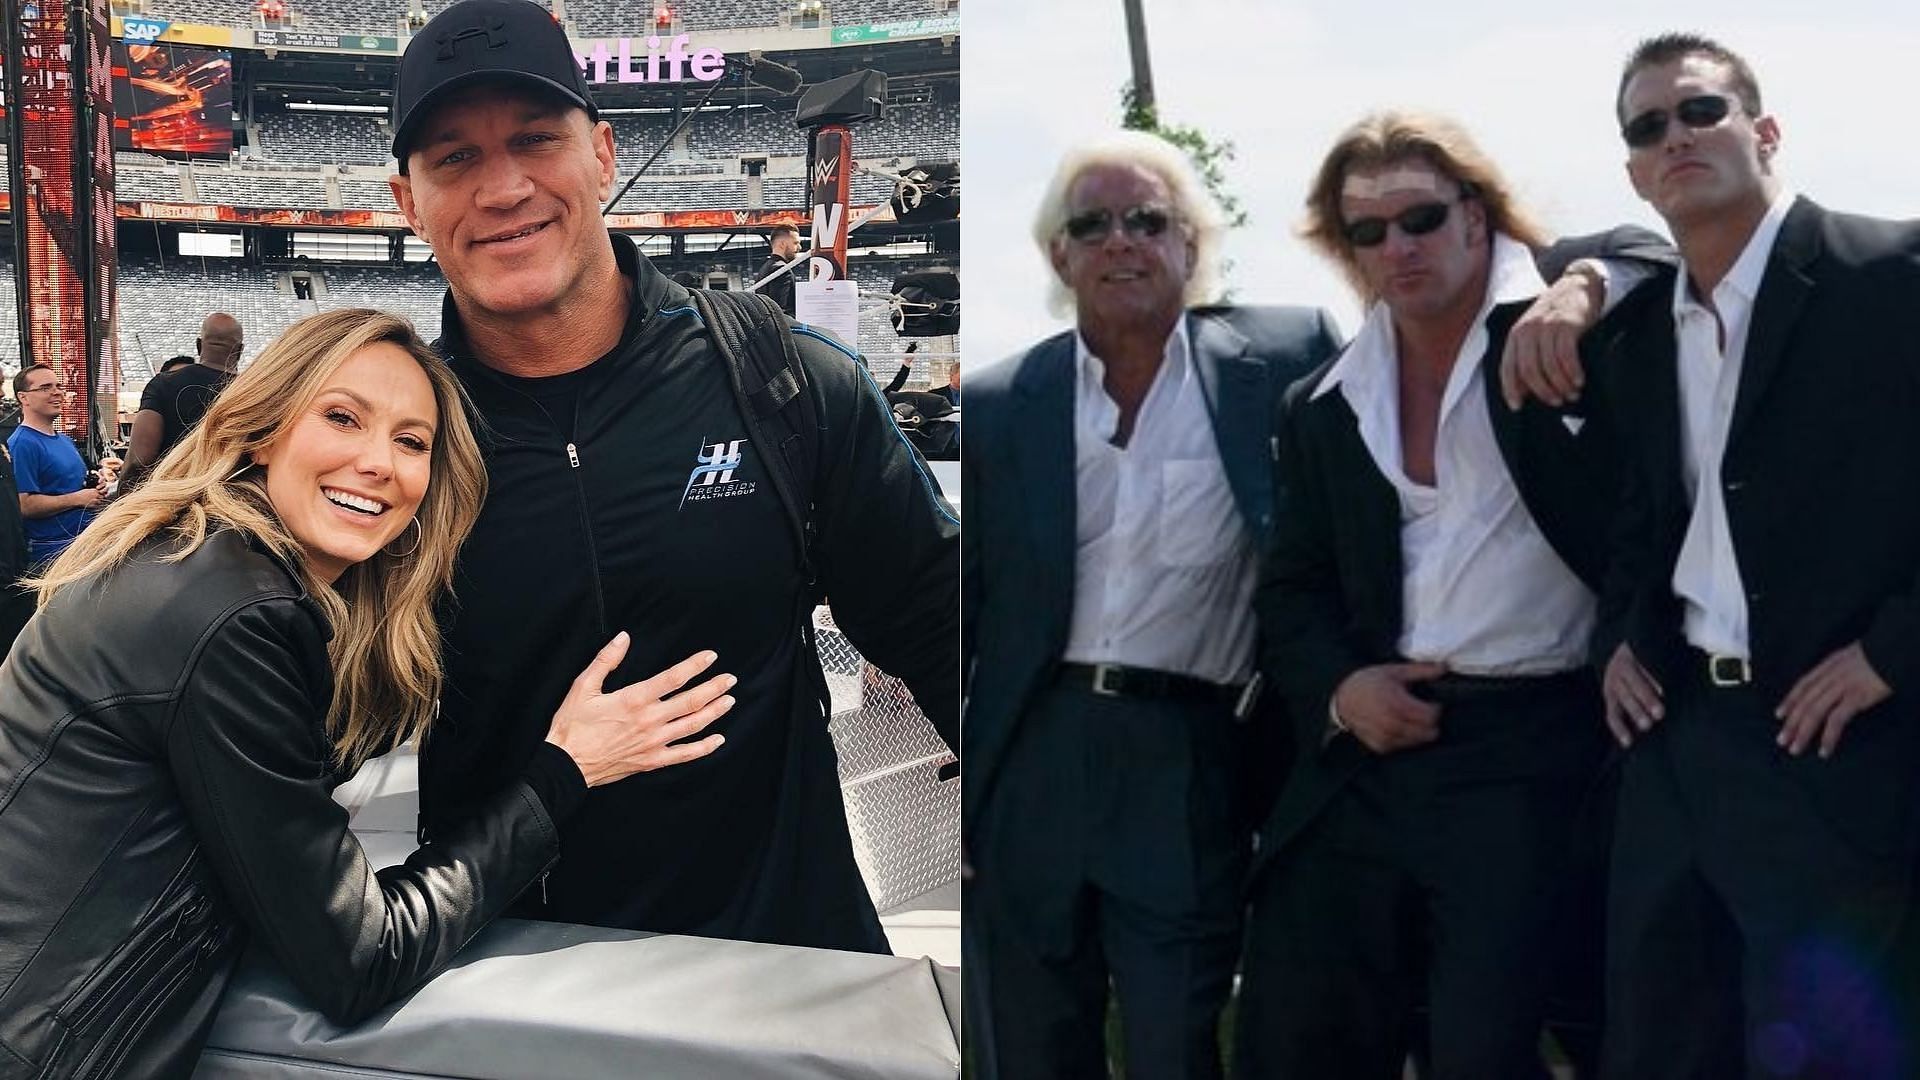 Stacy Keibler and Randy Orton (left); Ric Flair, Triple H, and Randy Orton (right)